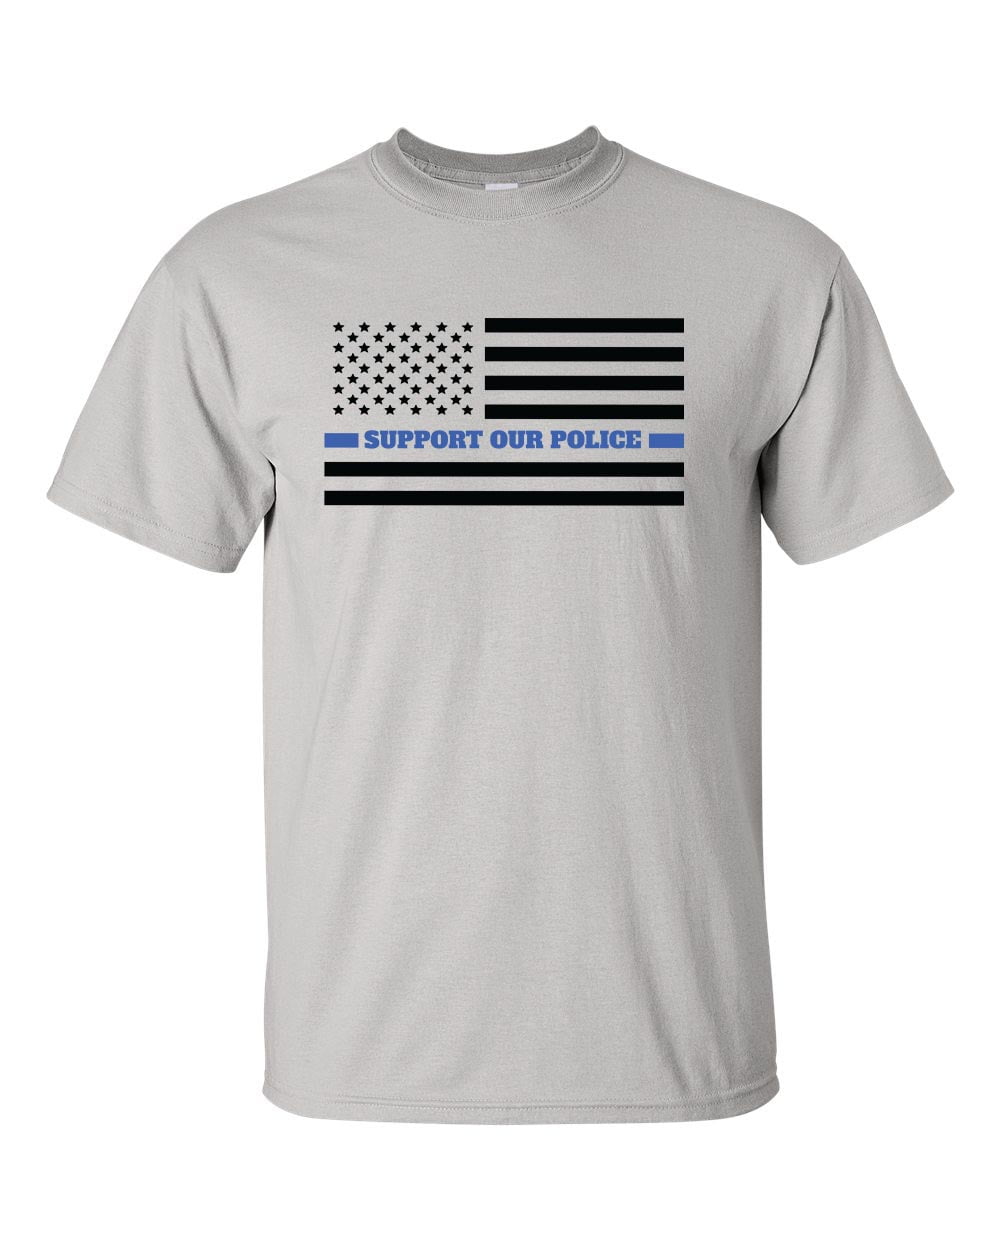 Back The Blue Thin Line On USA Flag Support Our Police T-shirt 